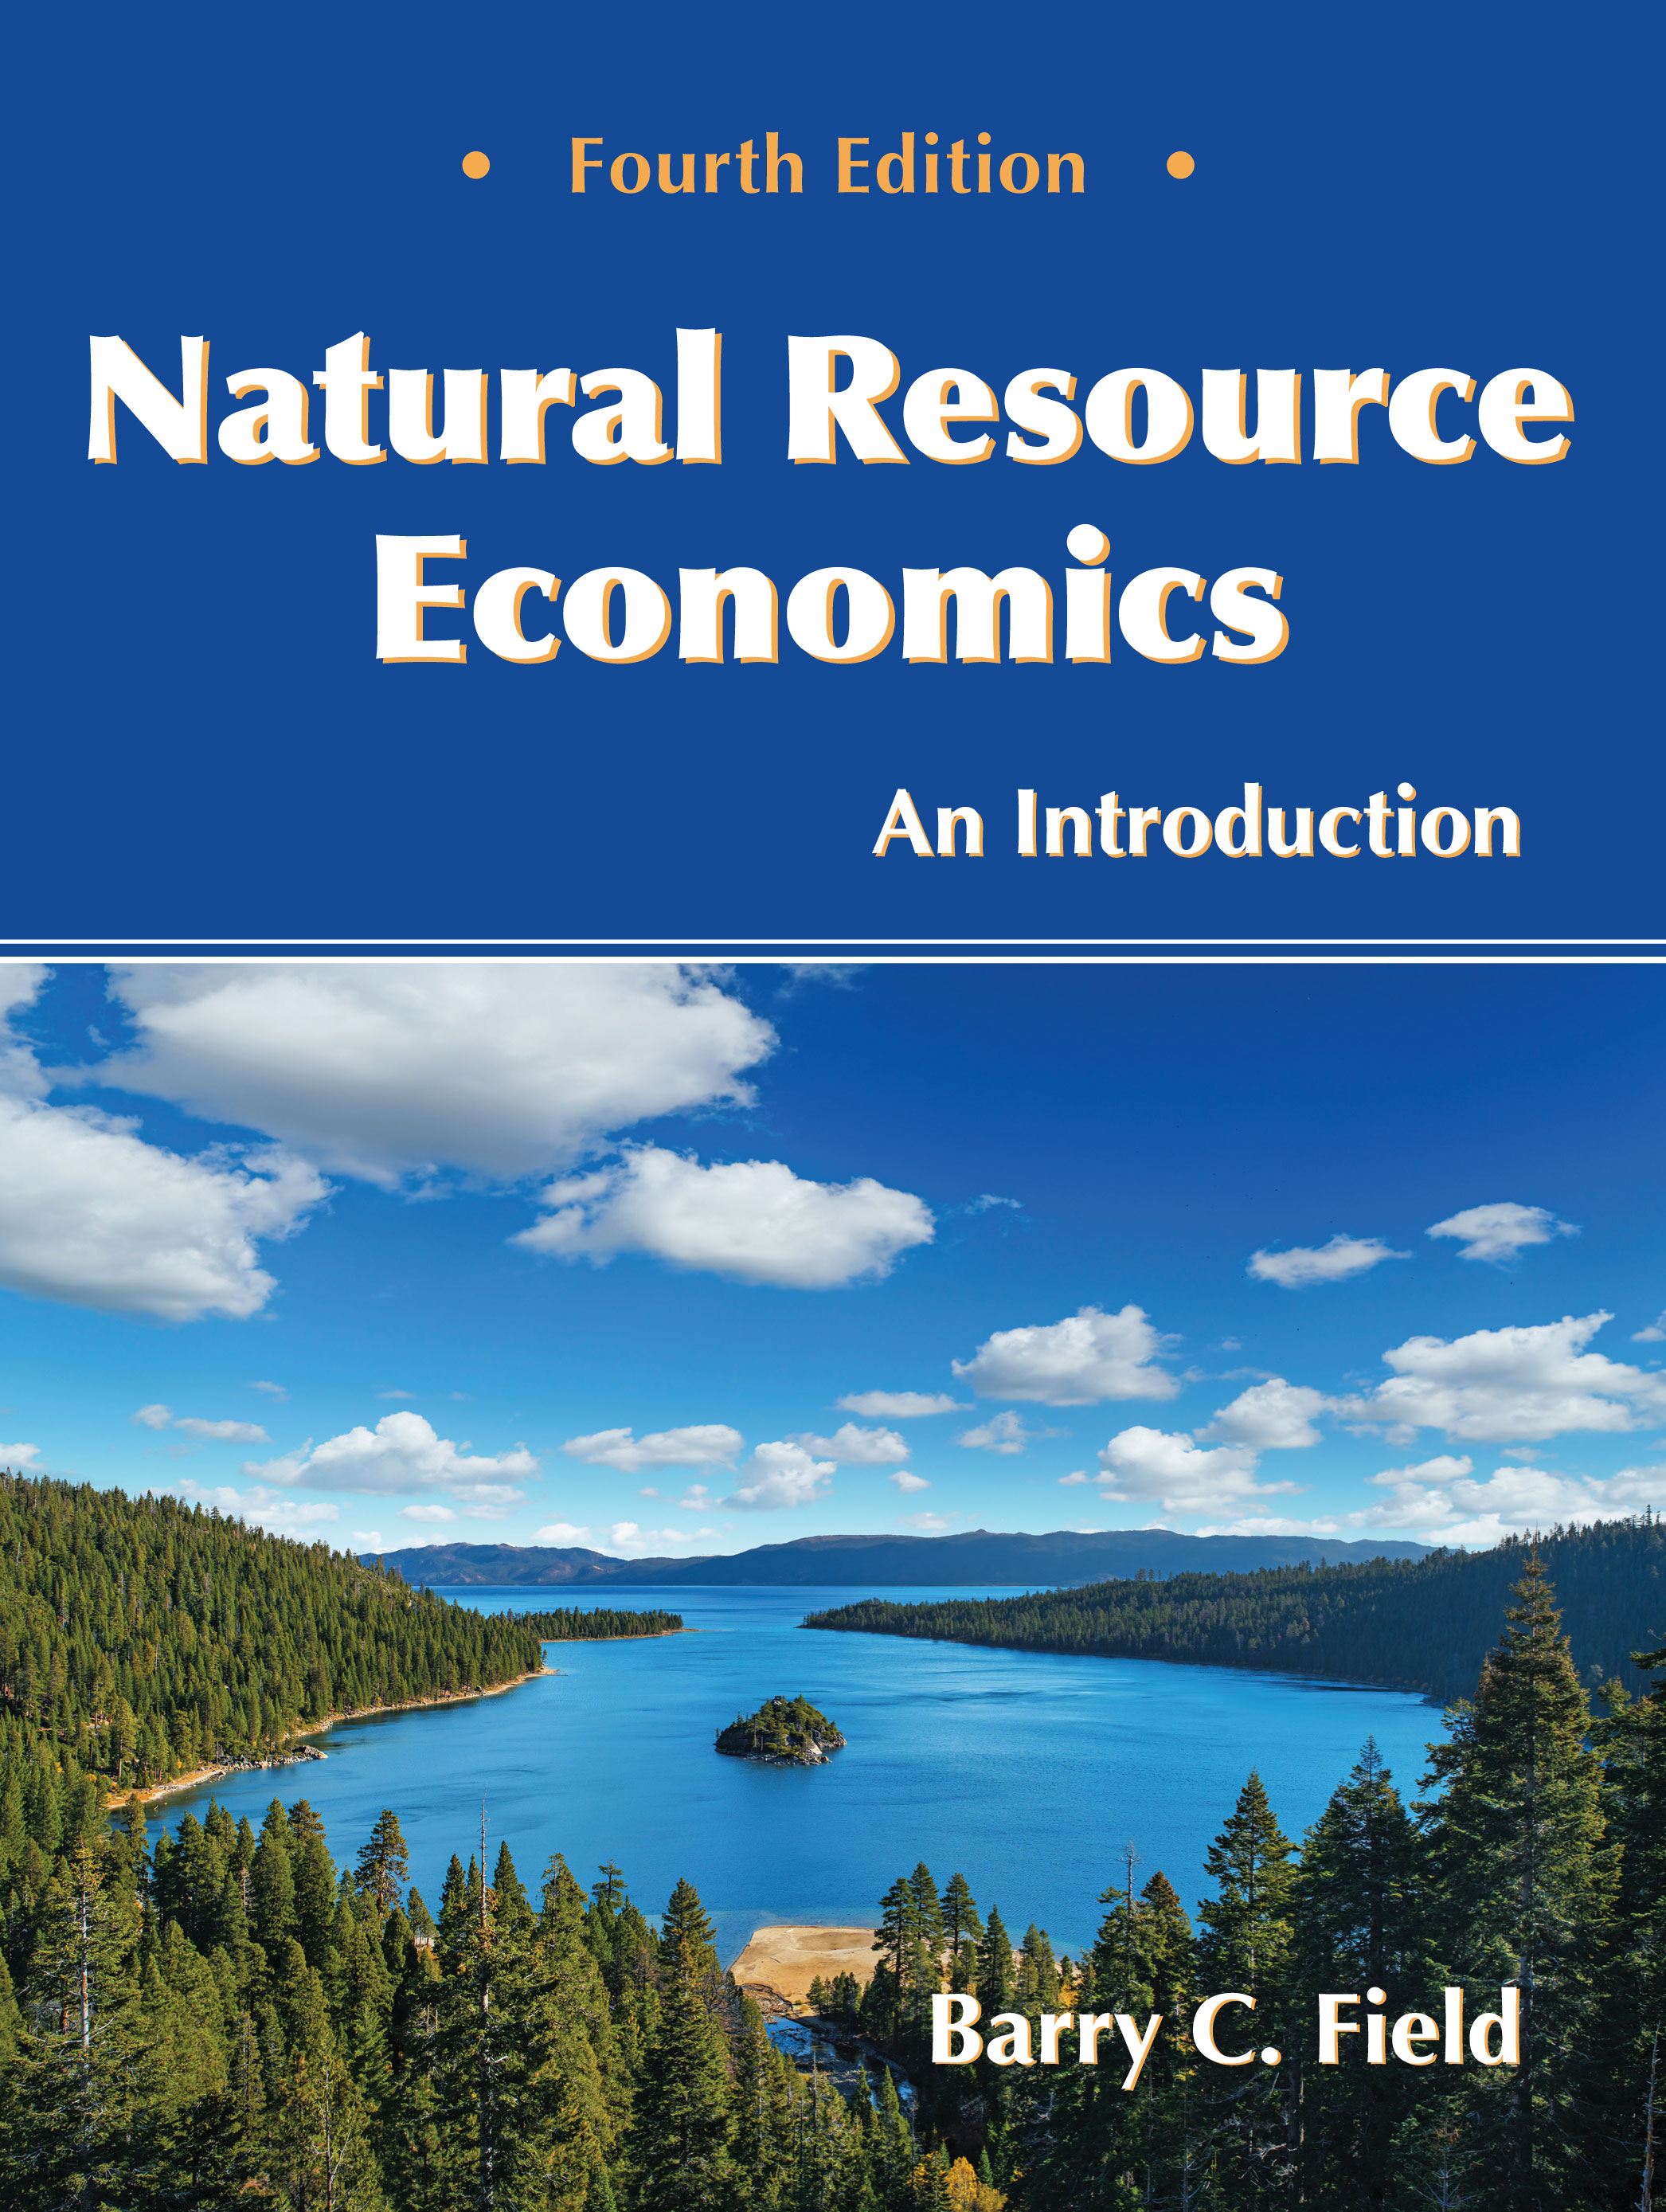 Natural Resource Economics: An Introduction, Fourth Edition by Barry C. Field